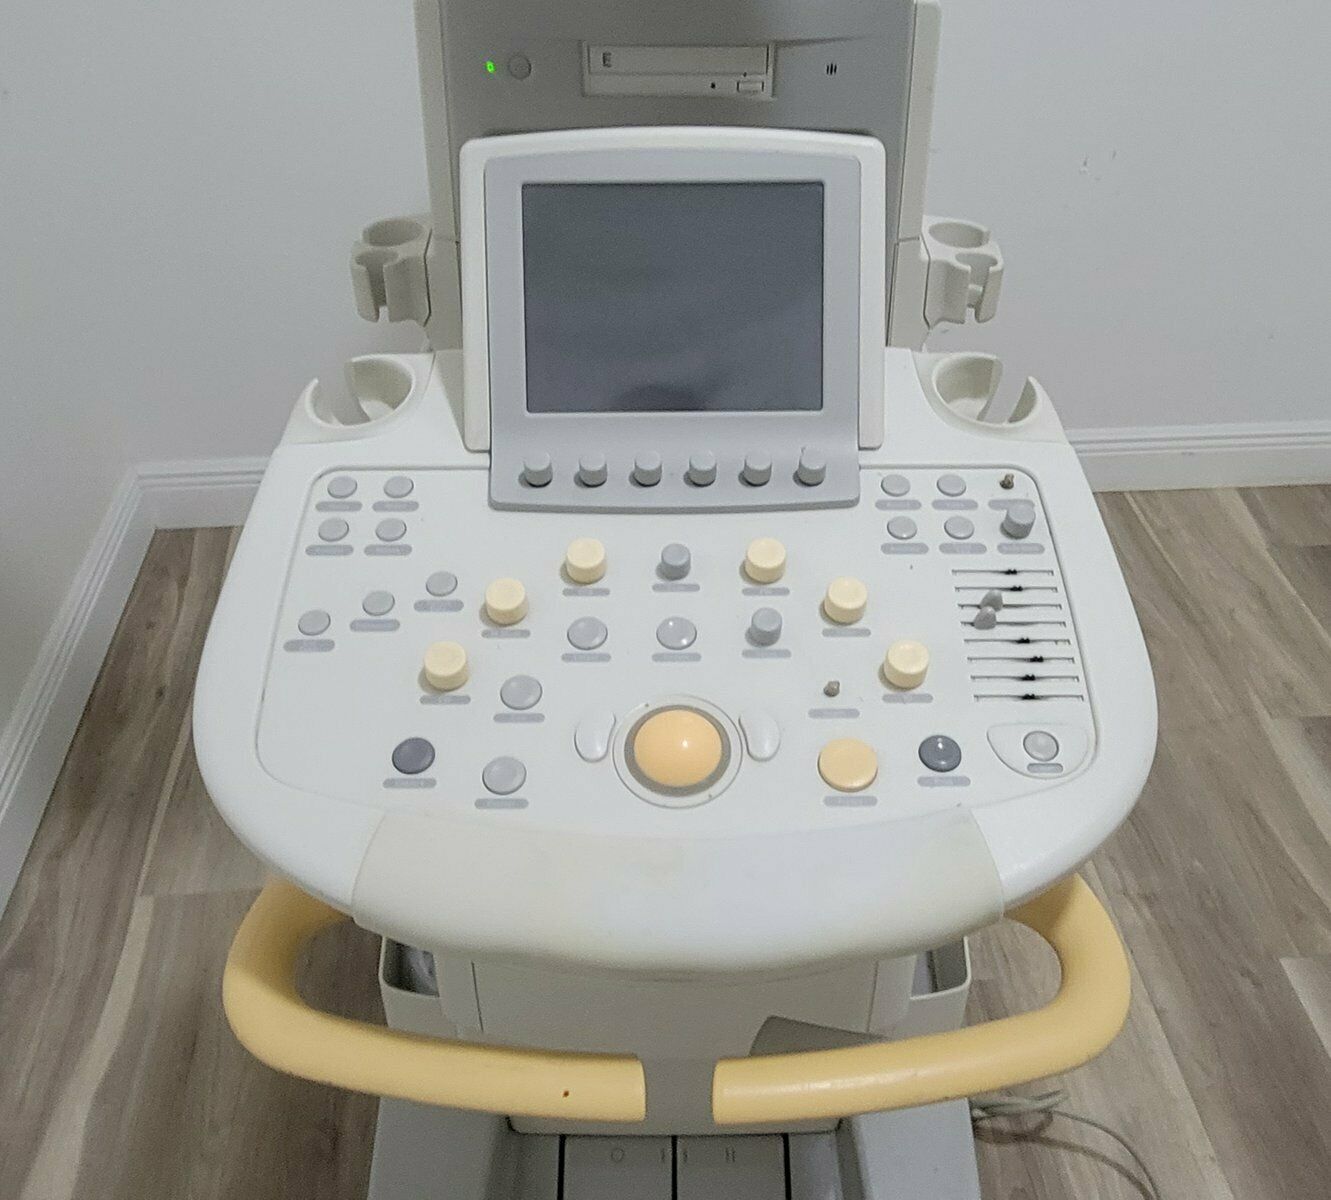 PHILIPS IU22 ULTRASOUND SYSTEM PARTS OR REPAIR DIAGNOSTIC ULTRASOUND MACHINES FOR SALE